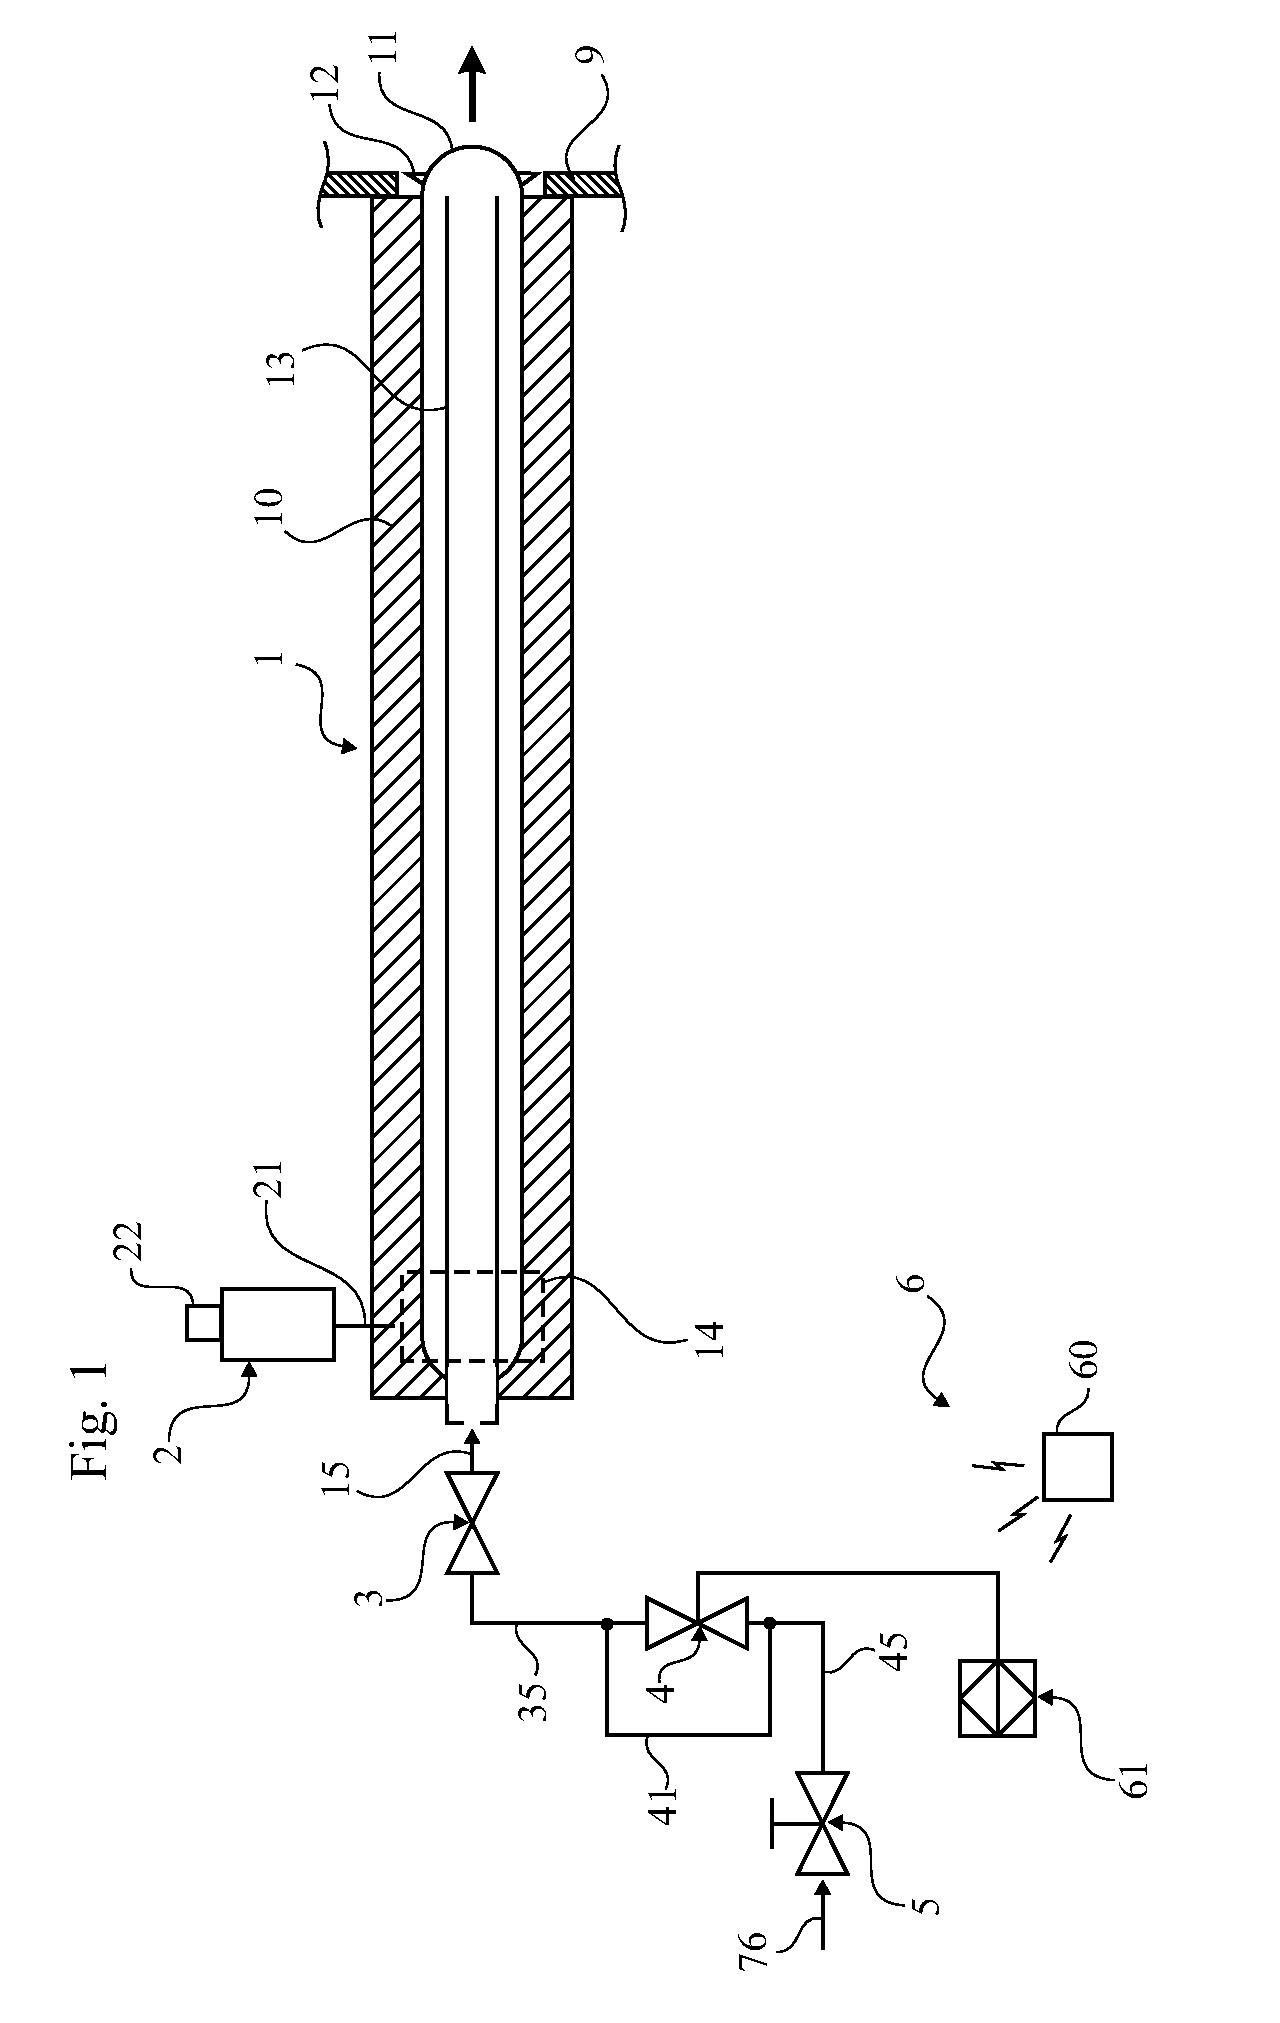 Method of rebuilding a sootblowing system of a recovery furnace, a sootblower for a recovery furnace, and a sootblowing system including a plurality of sootblowers